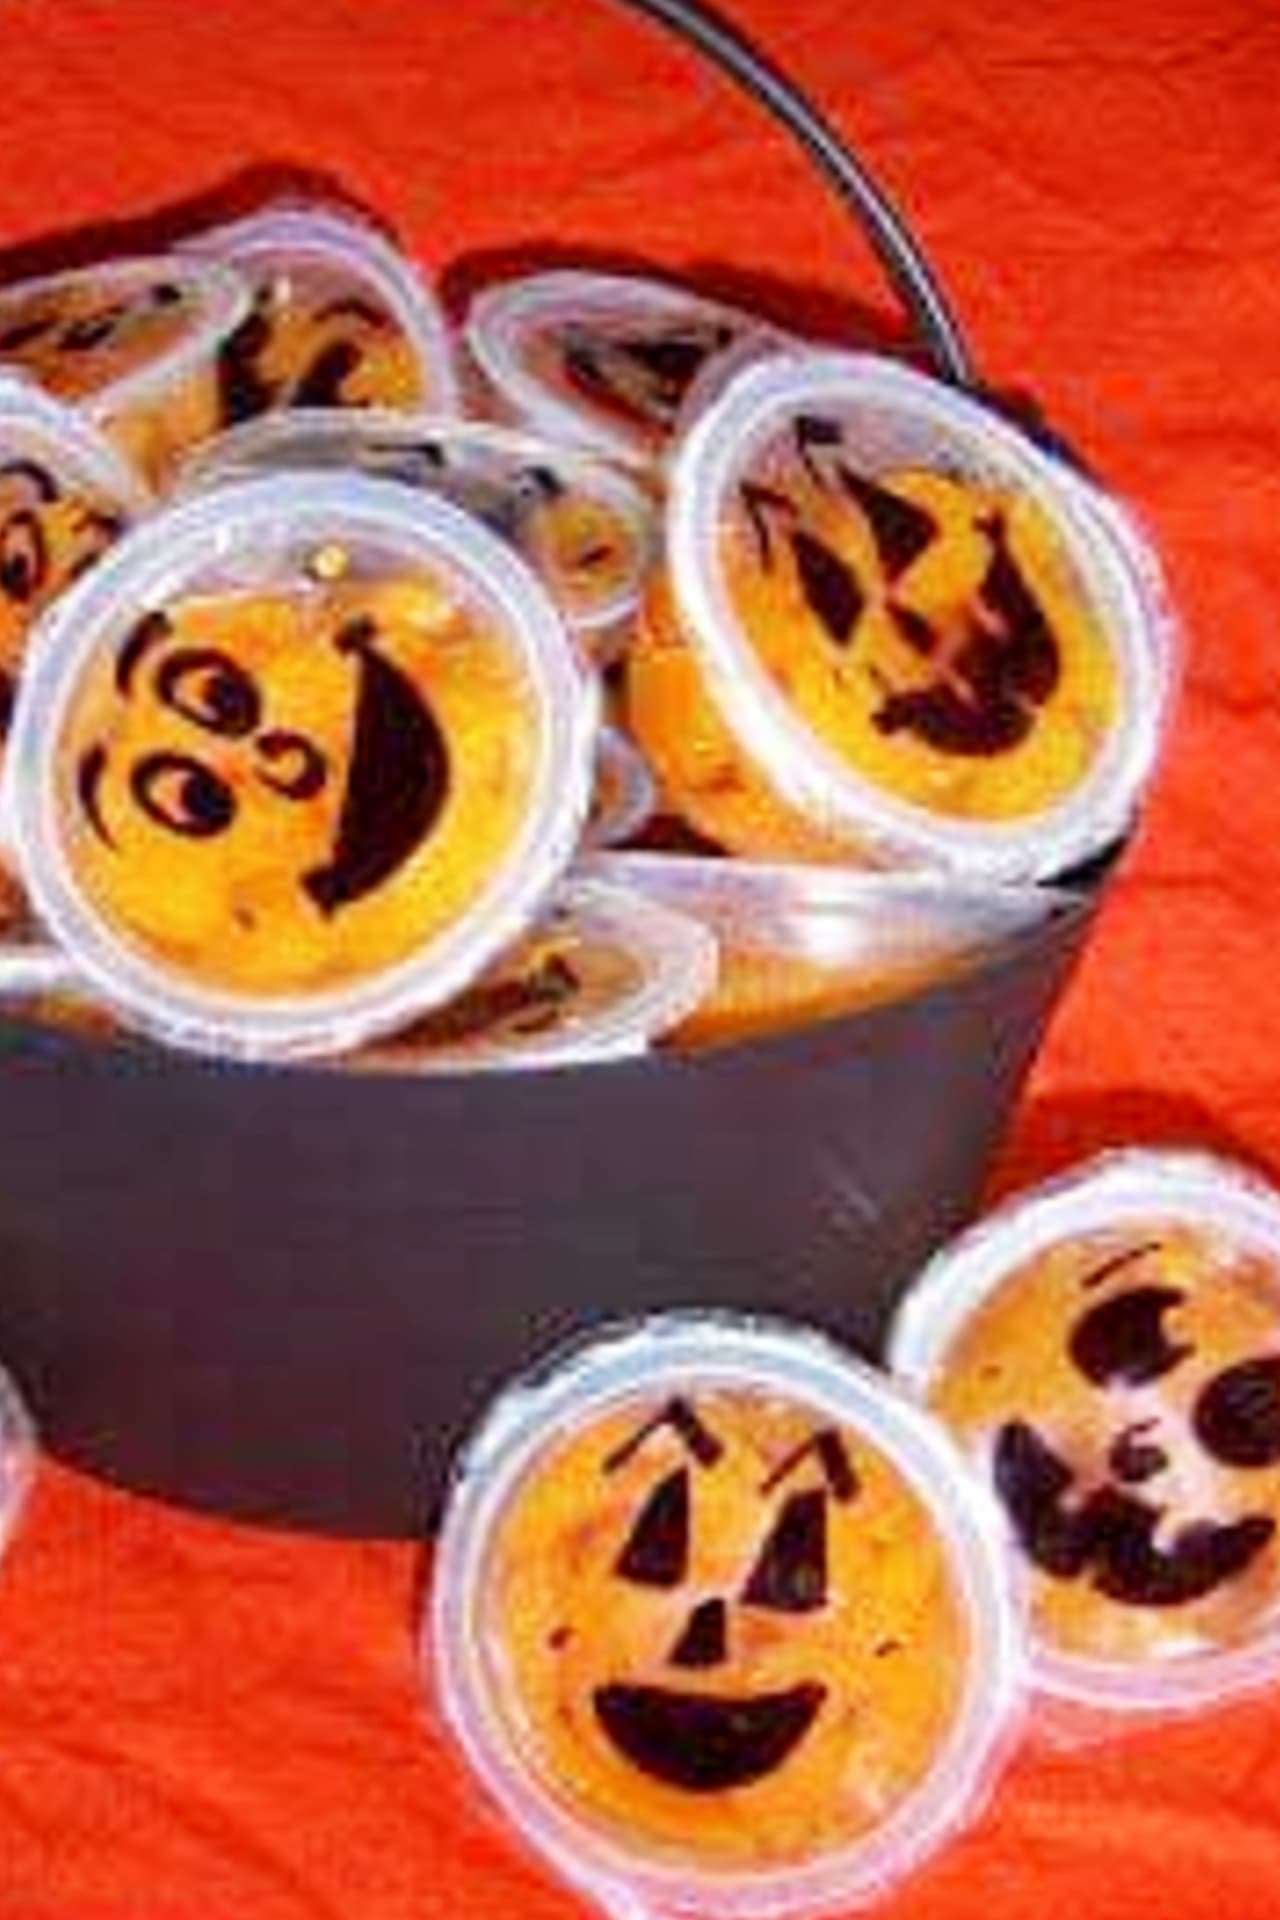 Halloween Treats!  Healthy Halloween treats, snacks, treat bags and treat ideas for kids.  DIY Halloween snacks for school party, class, and more fast and easy kid friendly Halloween treats and snack ideas to make